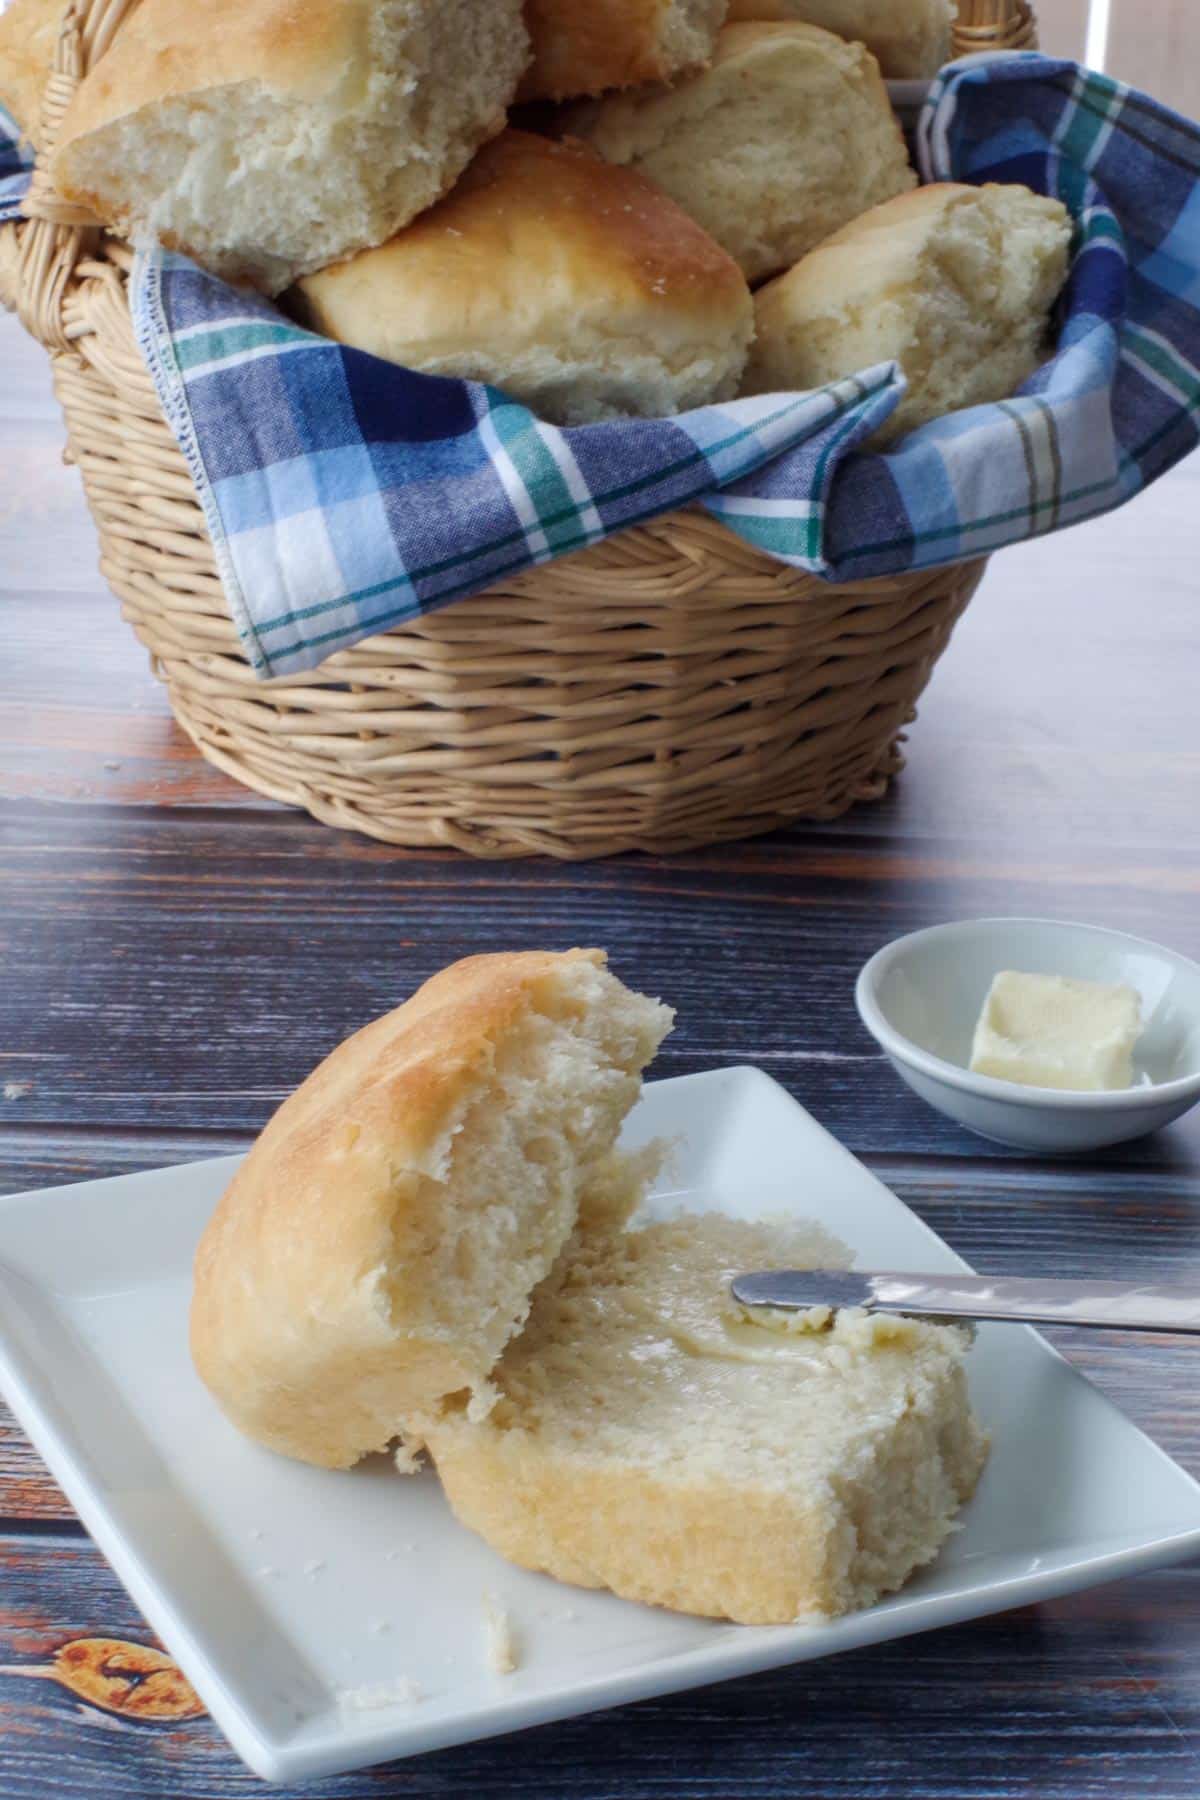 This image shows a roll on a plate with butter. Behind the plate is a basket filled with rolls. 